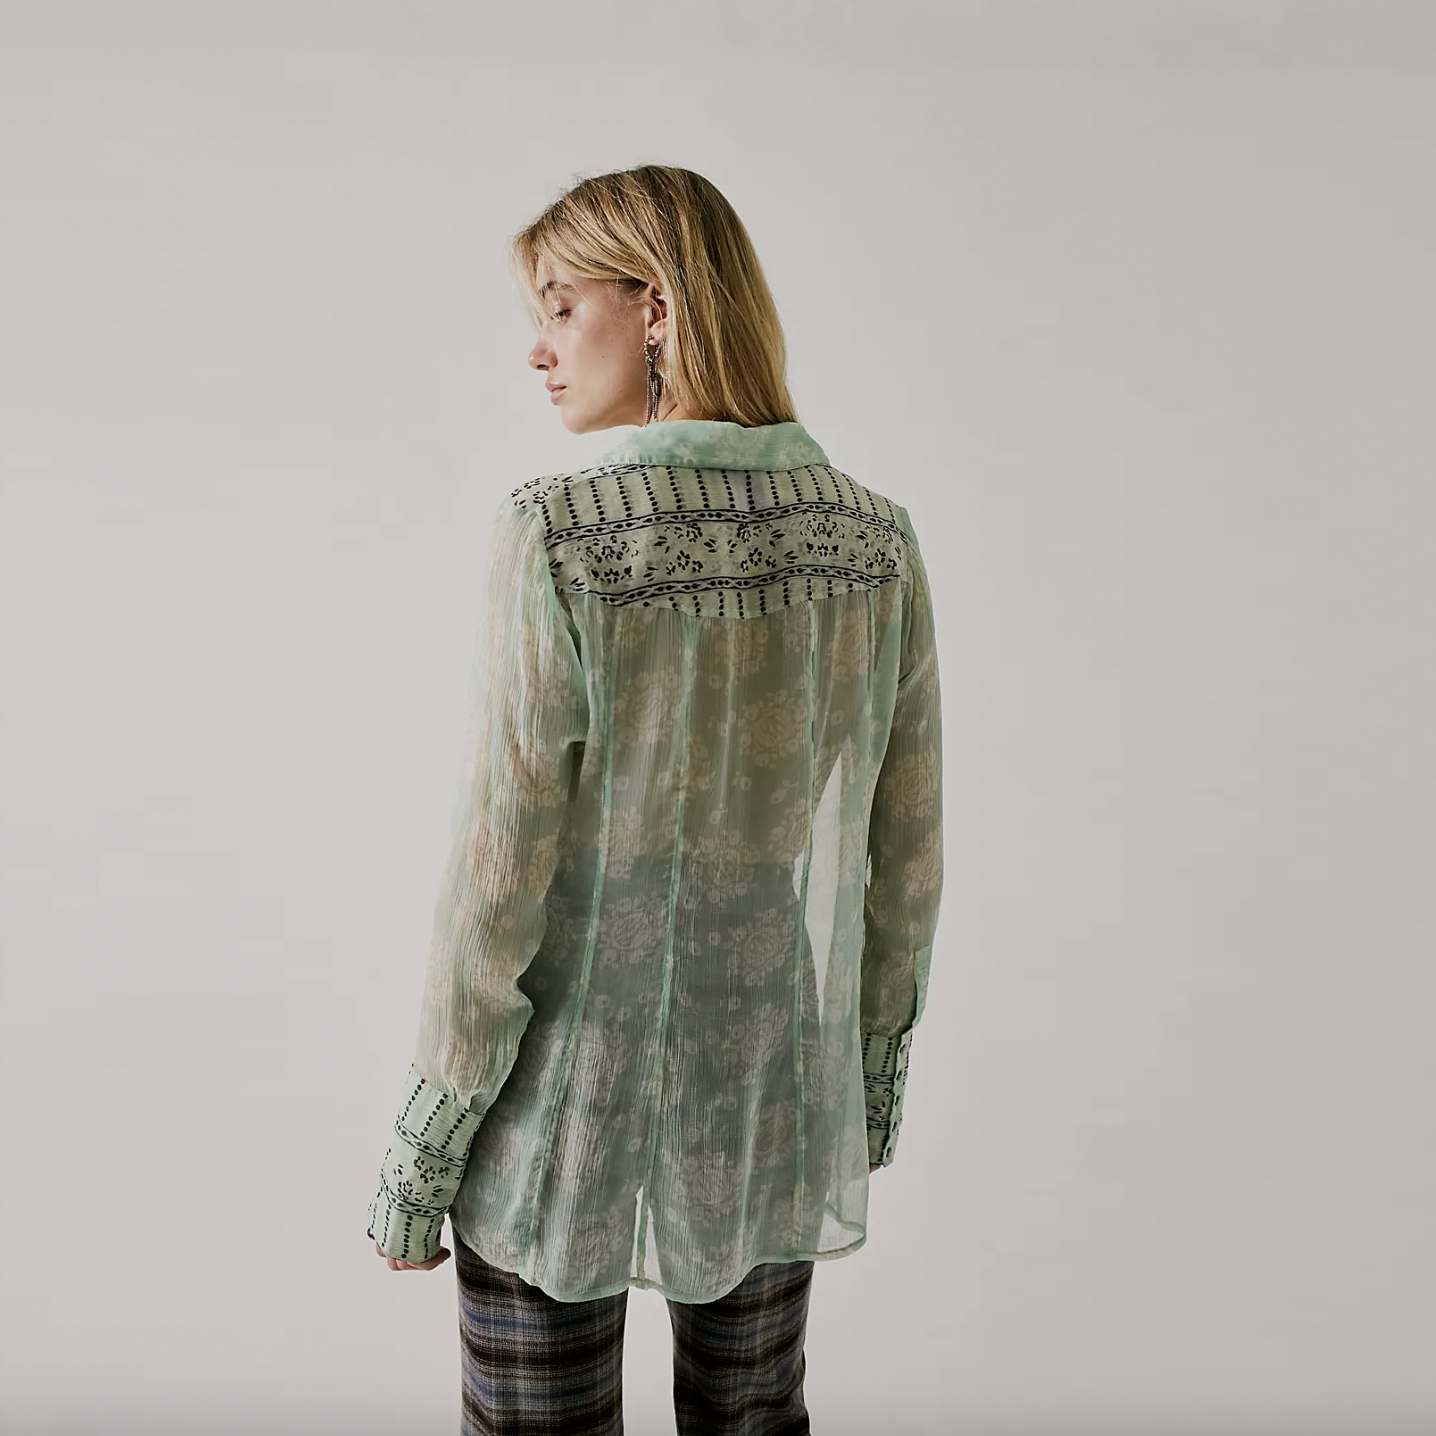 free people x anna sui stevie top in sage combo - size small